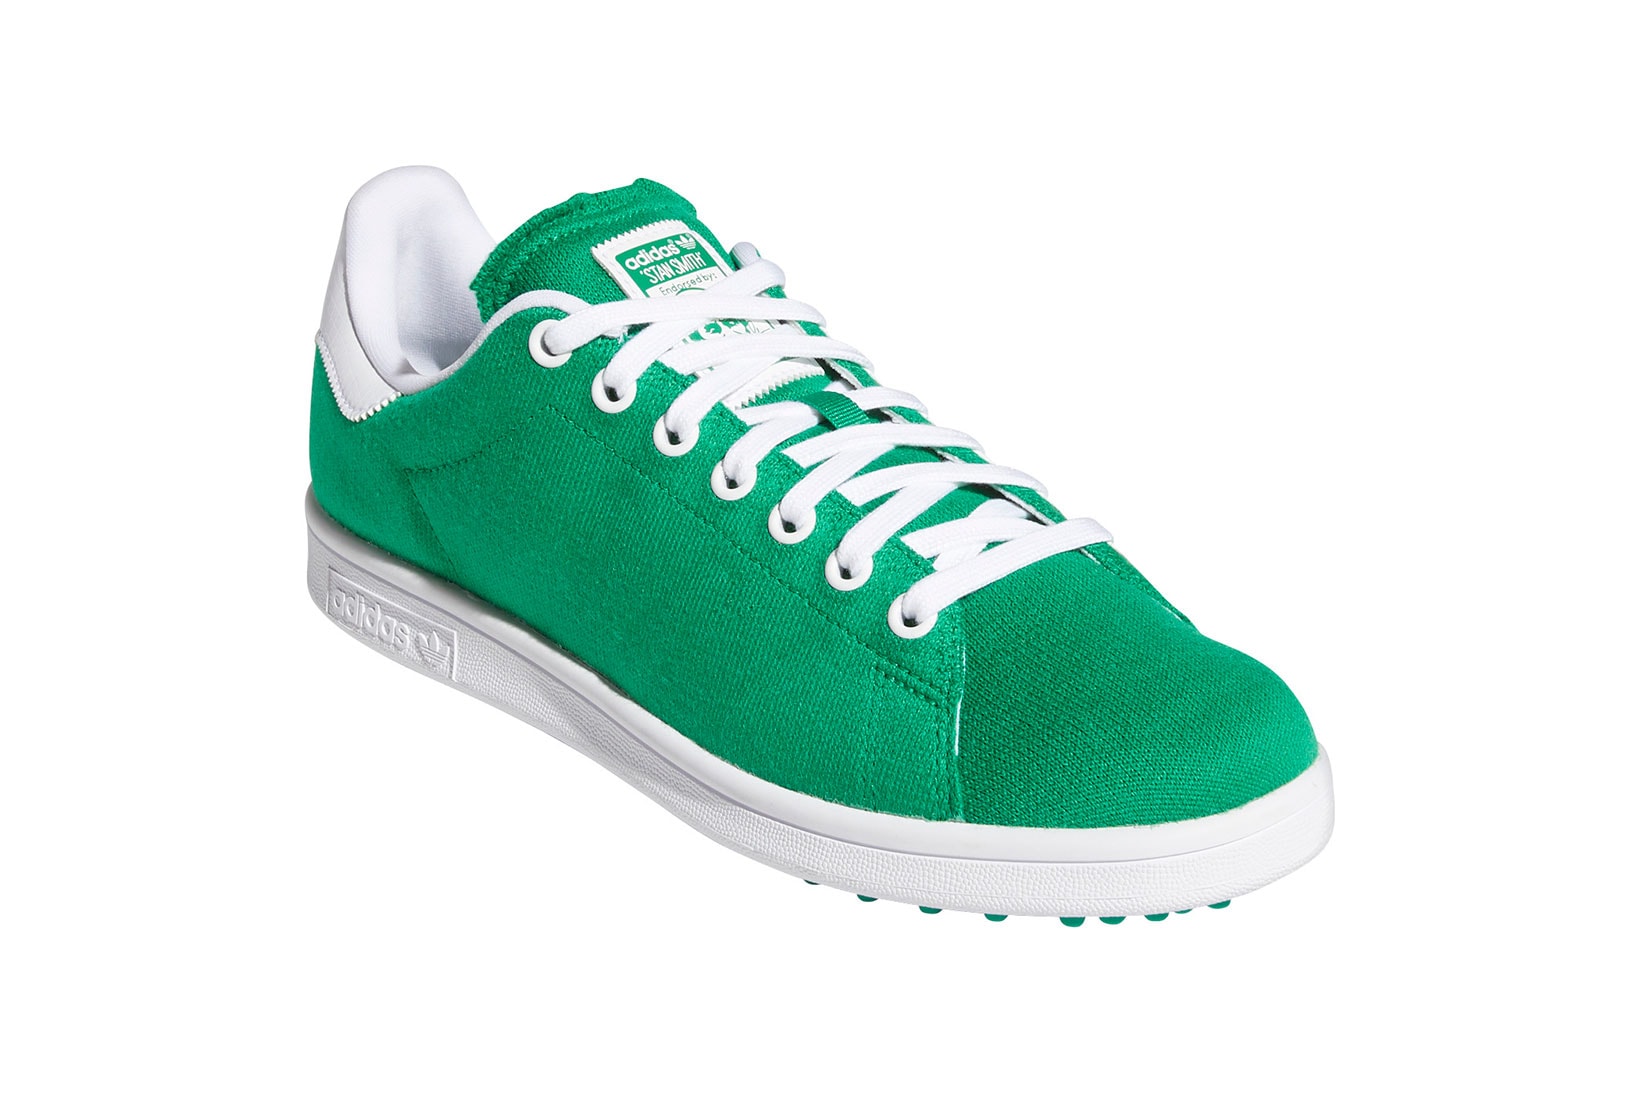 adidas originals golf stan smith sneakers sustainable green white footwear shoes kicks sneakerhead lateral